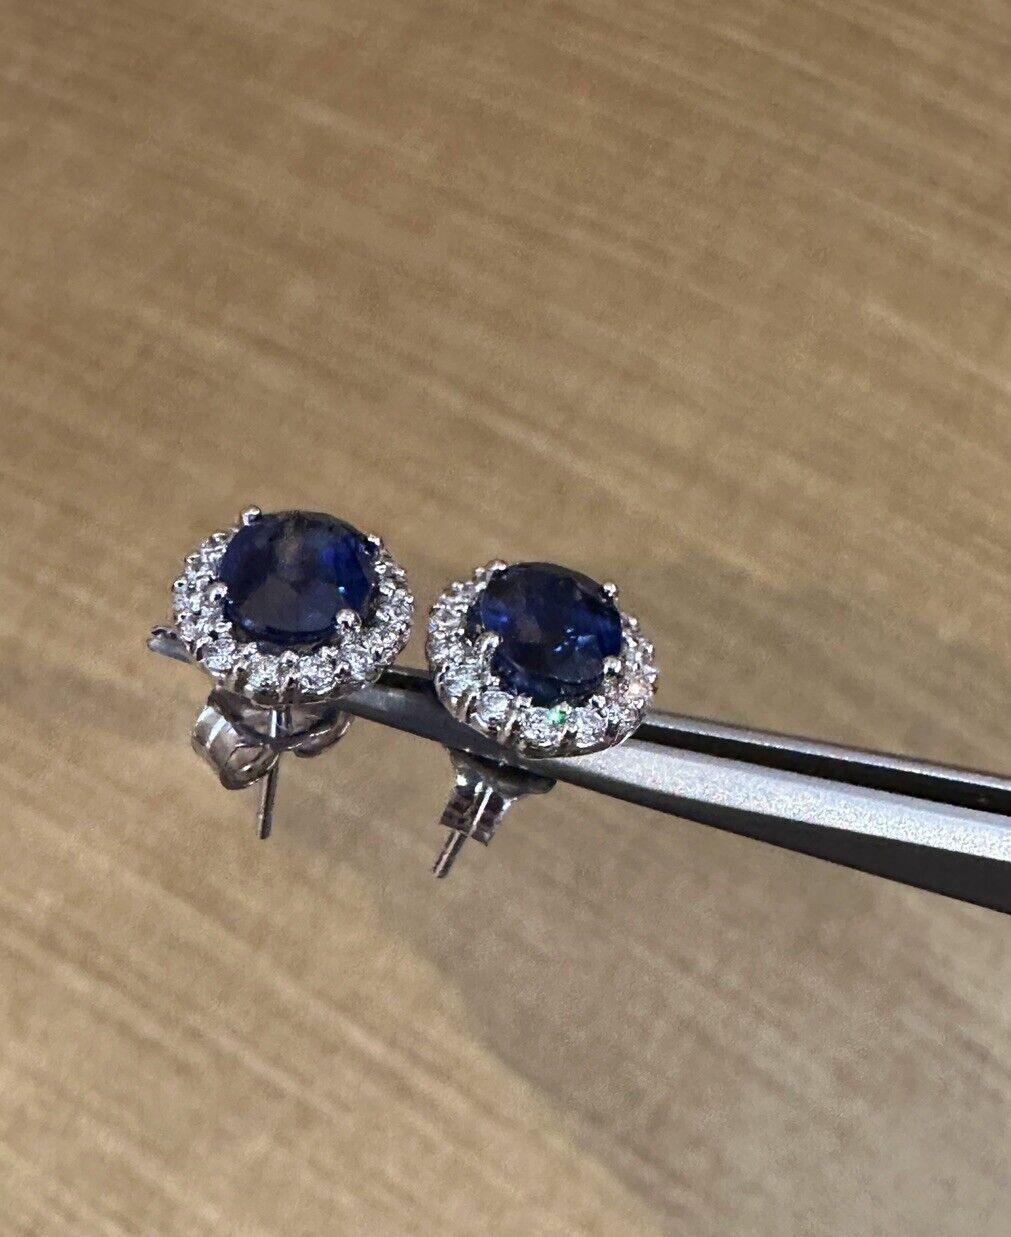 Oval Blue Sapphire and Diamond Halo Earrings in 14k White Gold 

Diamond and Sapphire Earrings feature two Natural Oval Deep Blue Sapphires encircled by a halo of Round Brilliant Diamonds, set in 14k White Gold.

Total sapphire weight is 3.37